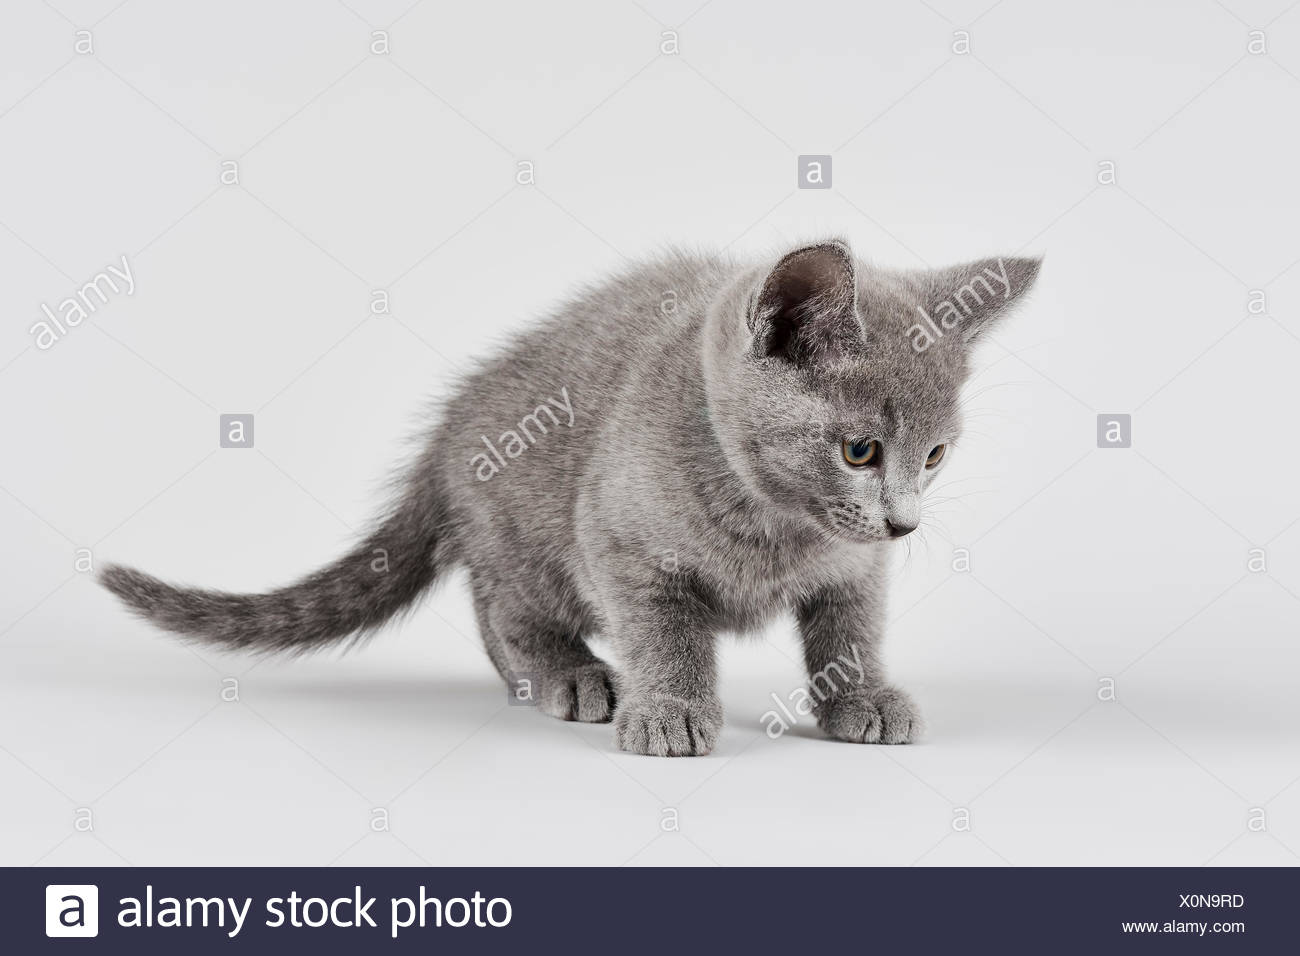 Purebred Cat Russian Blue Kitten Age 8 Weeks White Background Stock Photo Alamy